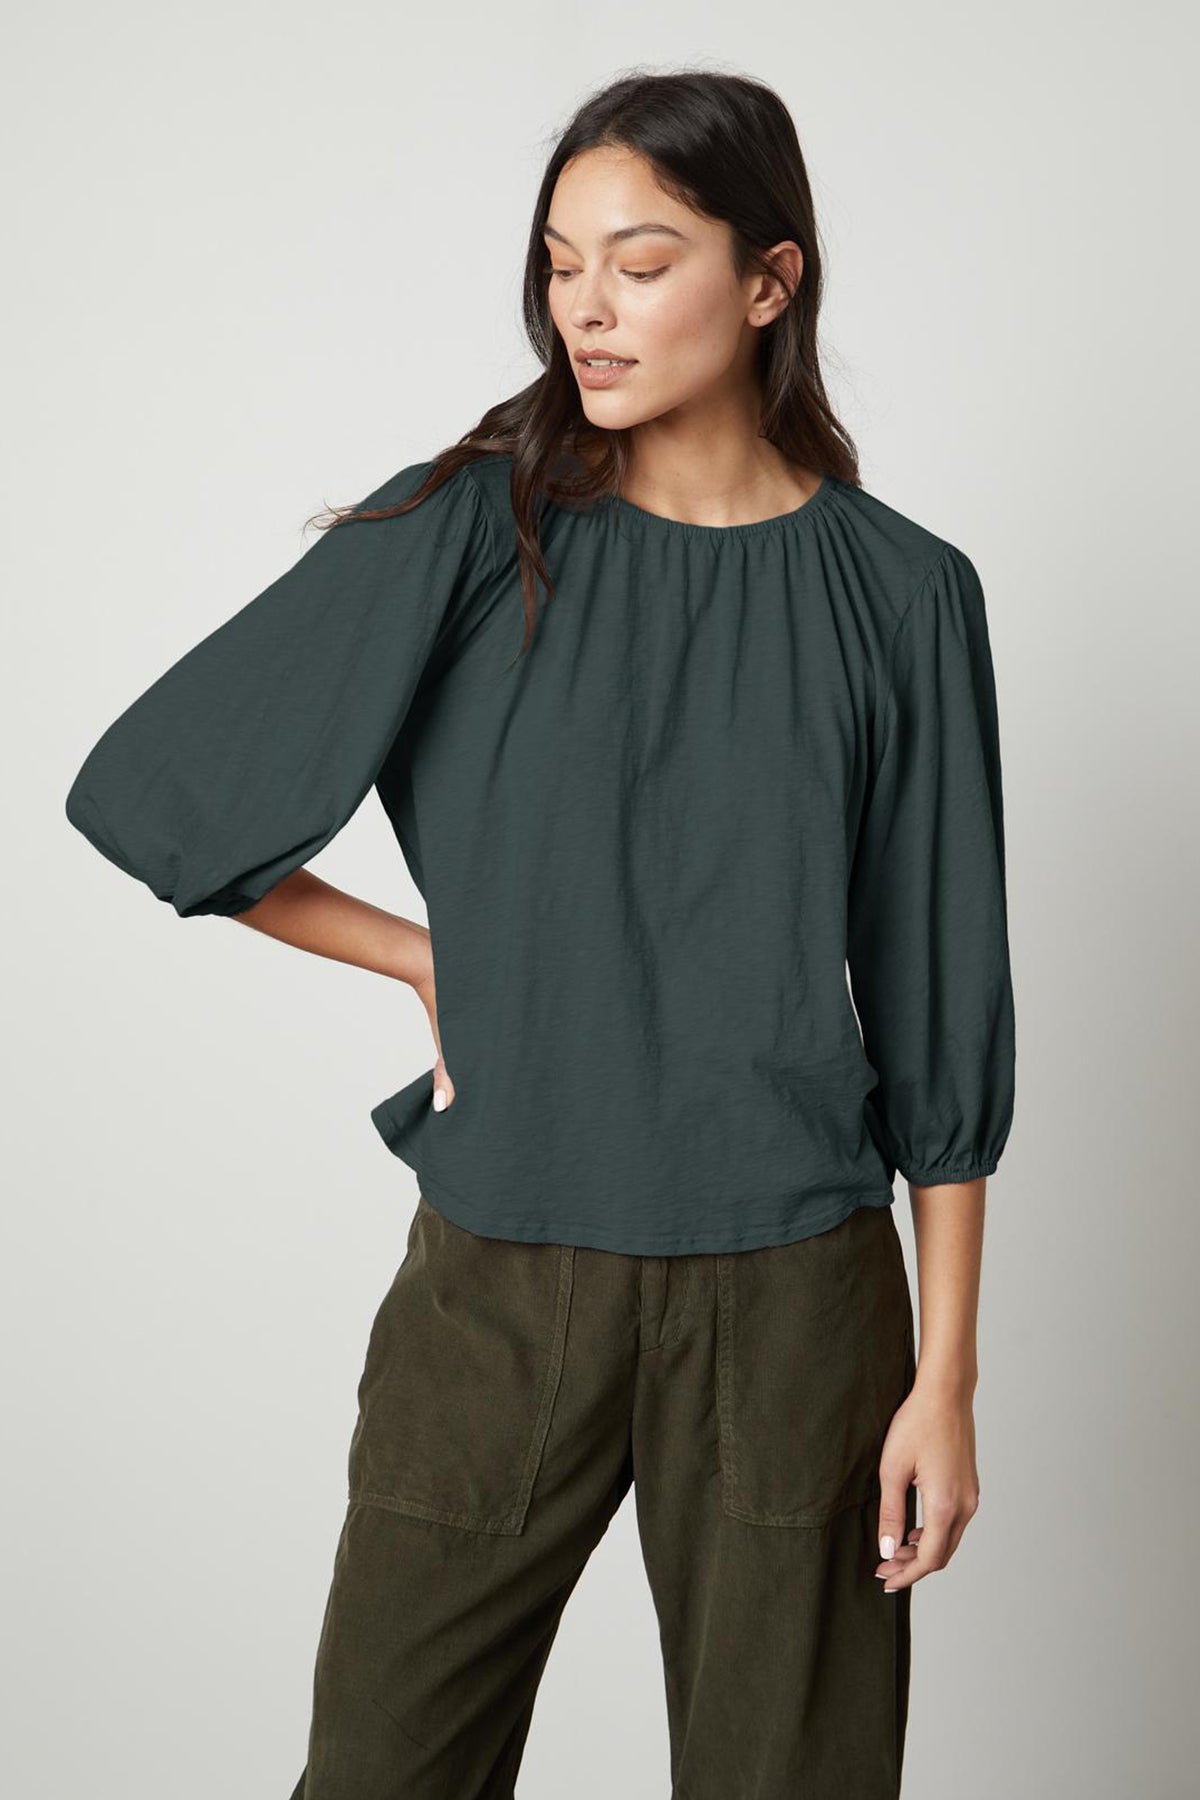 The model is wearing a Velvet by Graham & Spencer Julie 3/4 Sleeve Tee with puff sleeve.-26727740145857